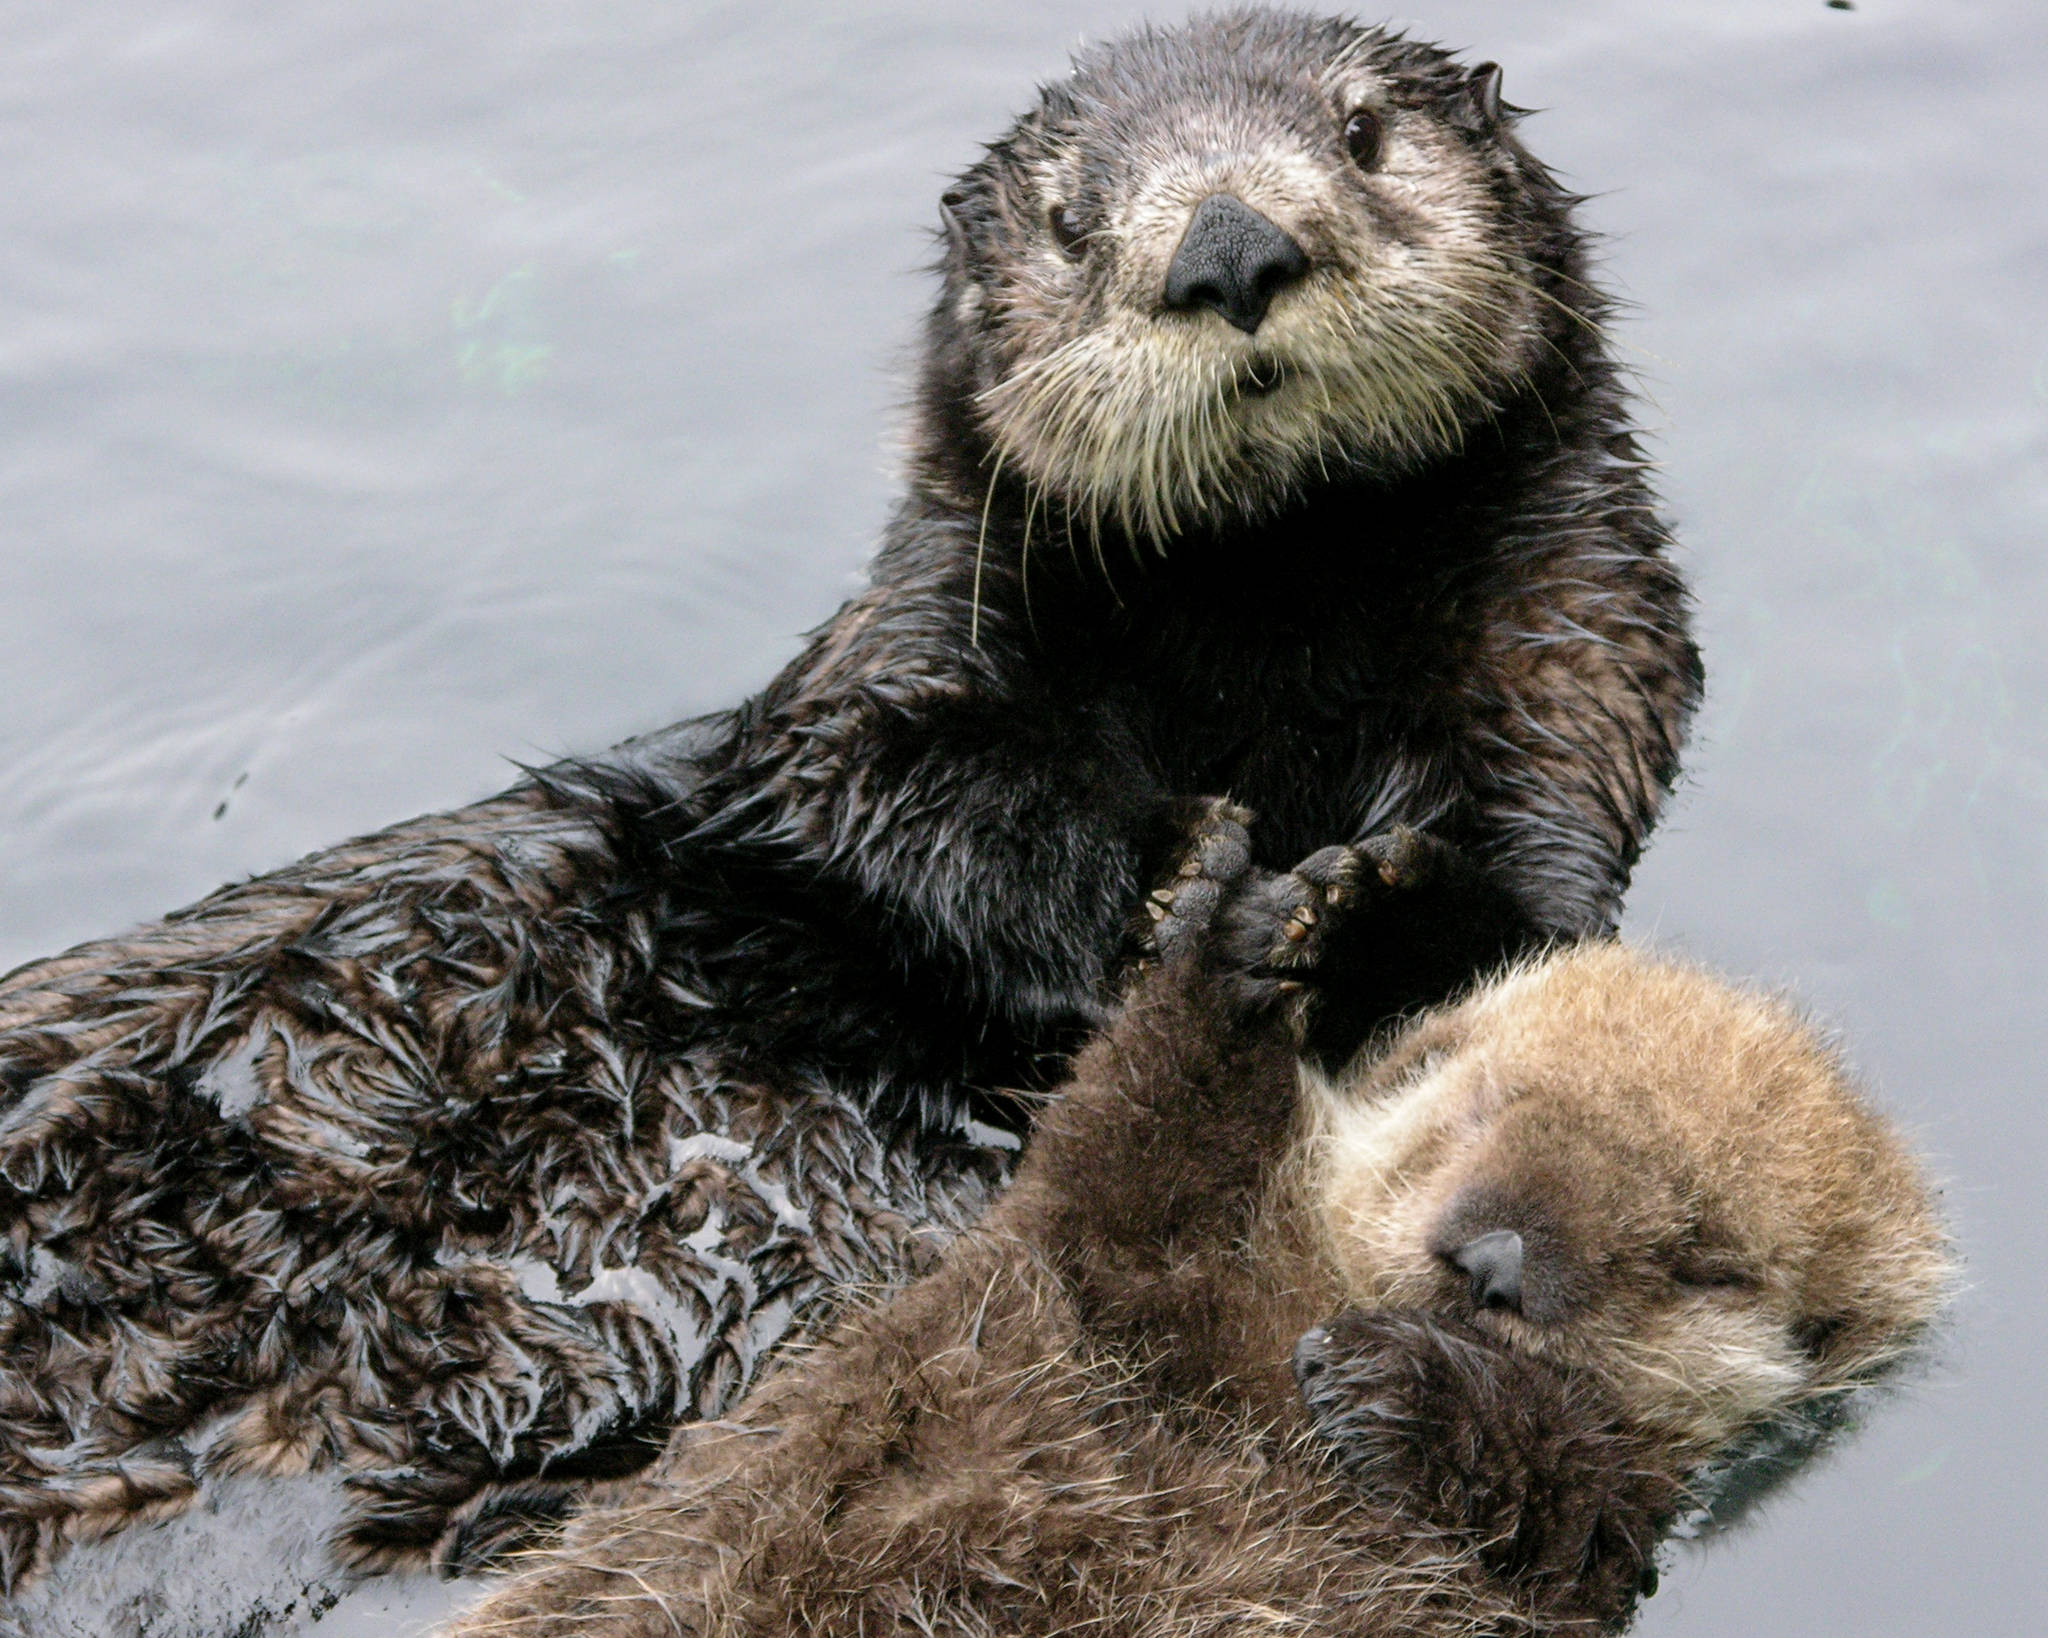 Sea otter mom holds hands with her young pup. Photo contributed by The Whale Museum and Seattle Aquarium